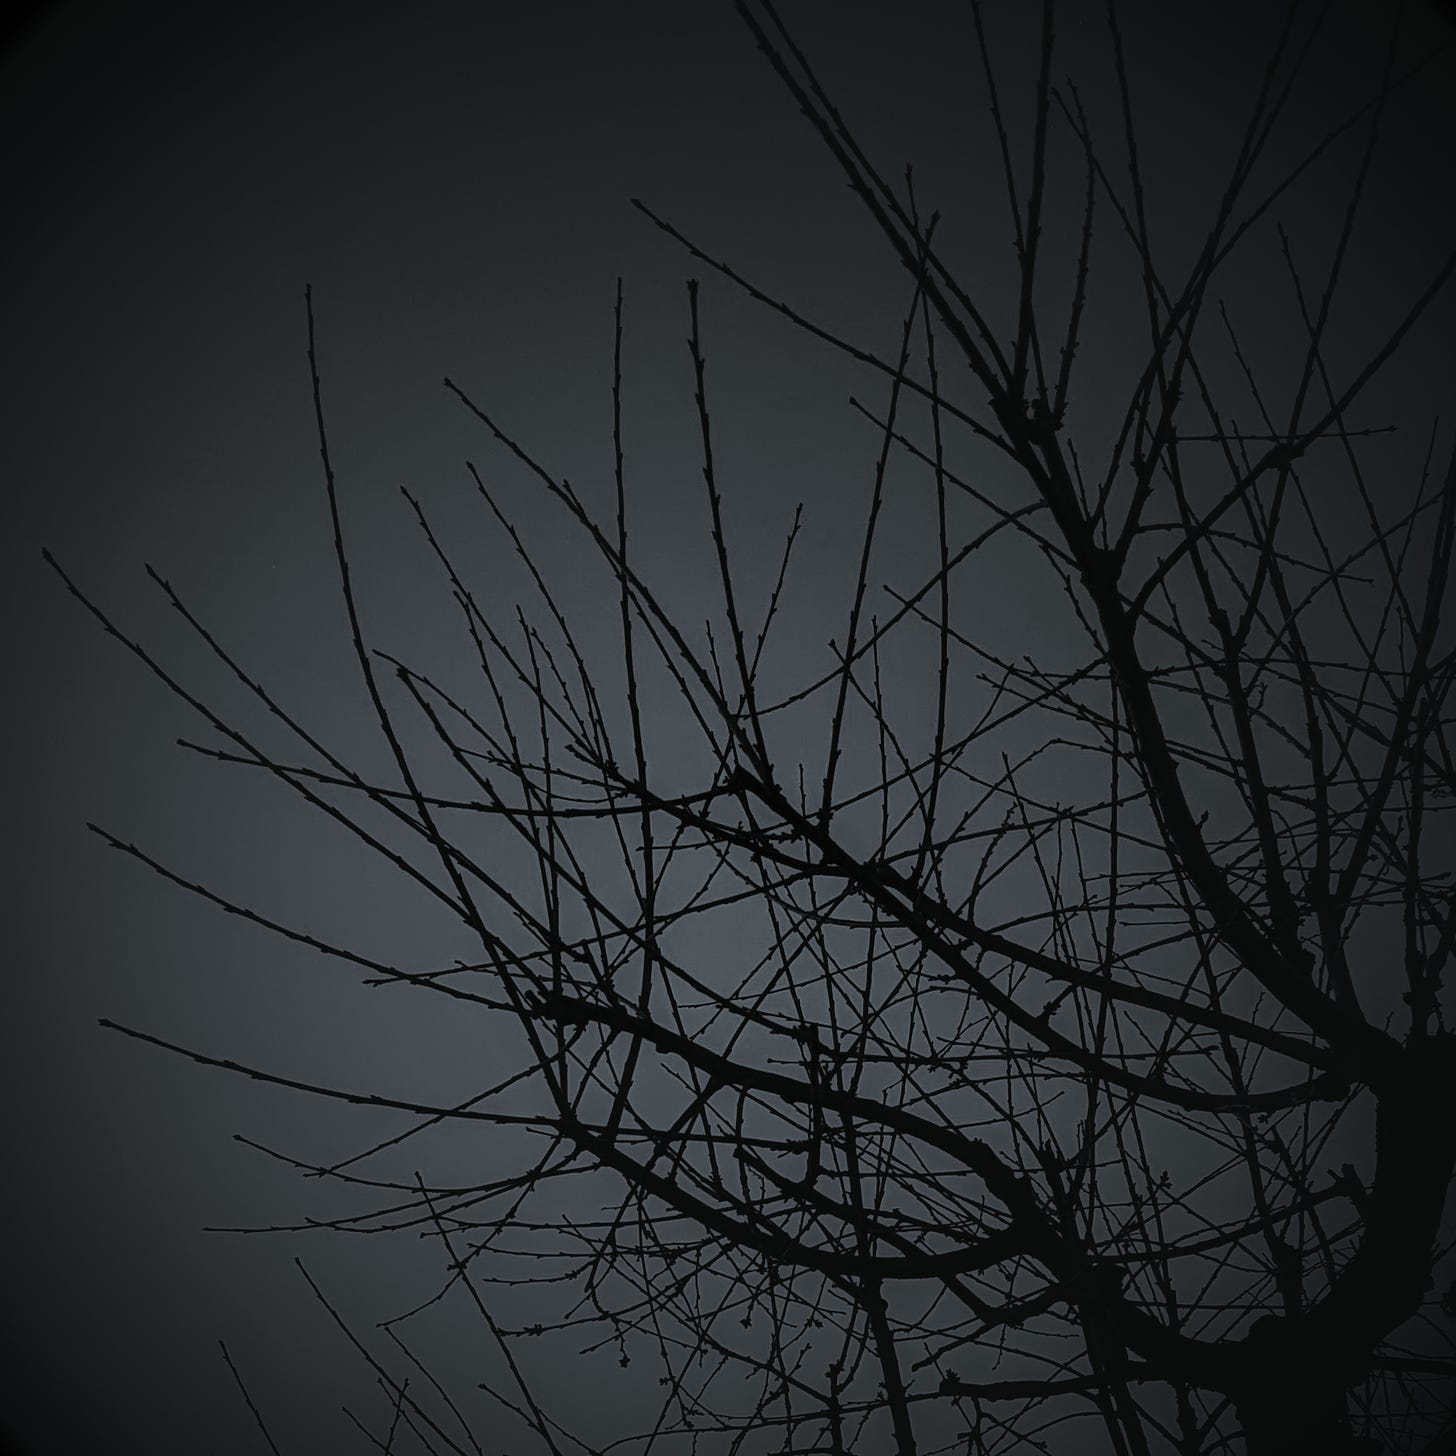 Bare branches against a dark sky.